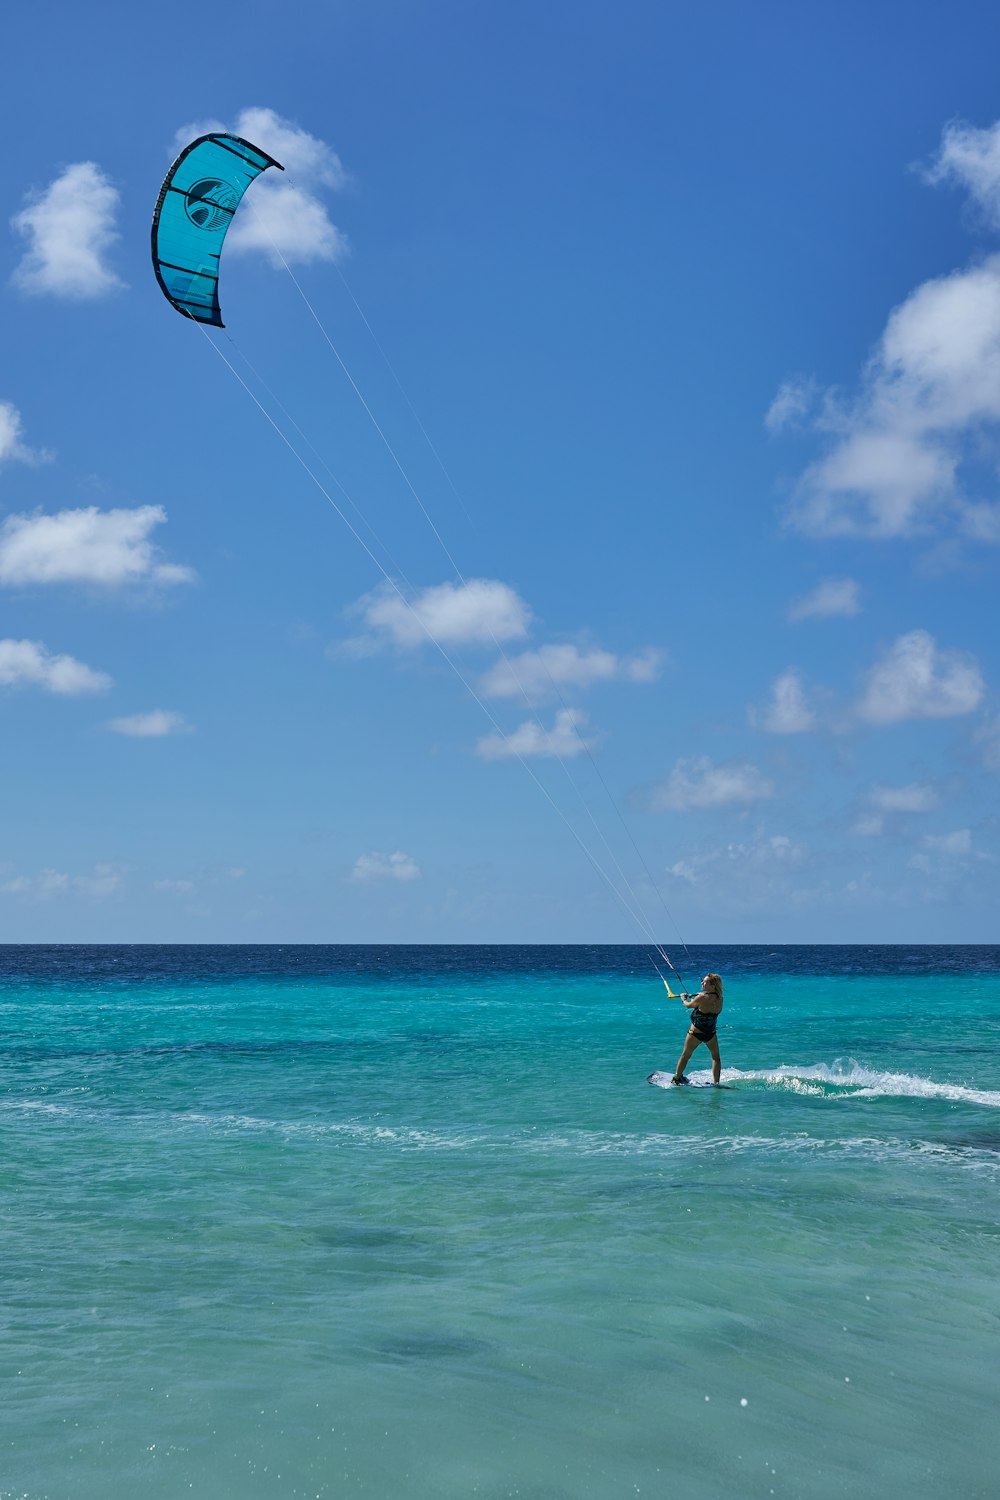 woman in white and black bikini holding blue and white kite surfing on sea during daytime